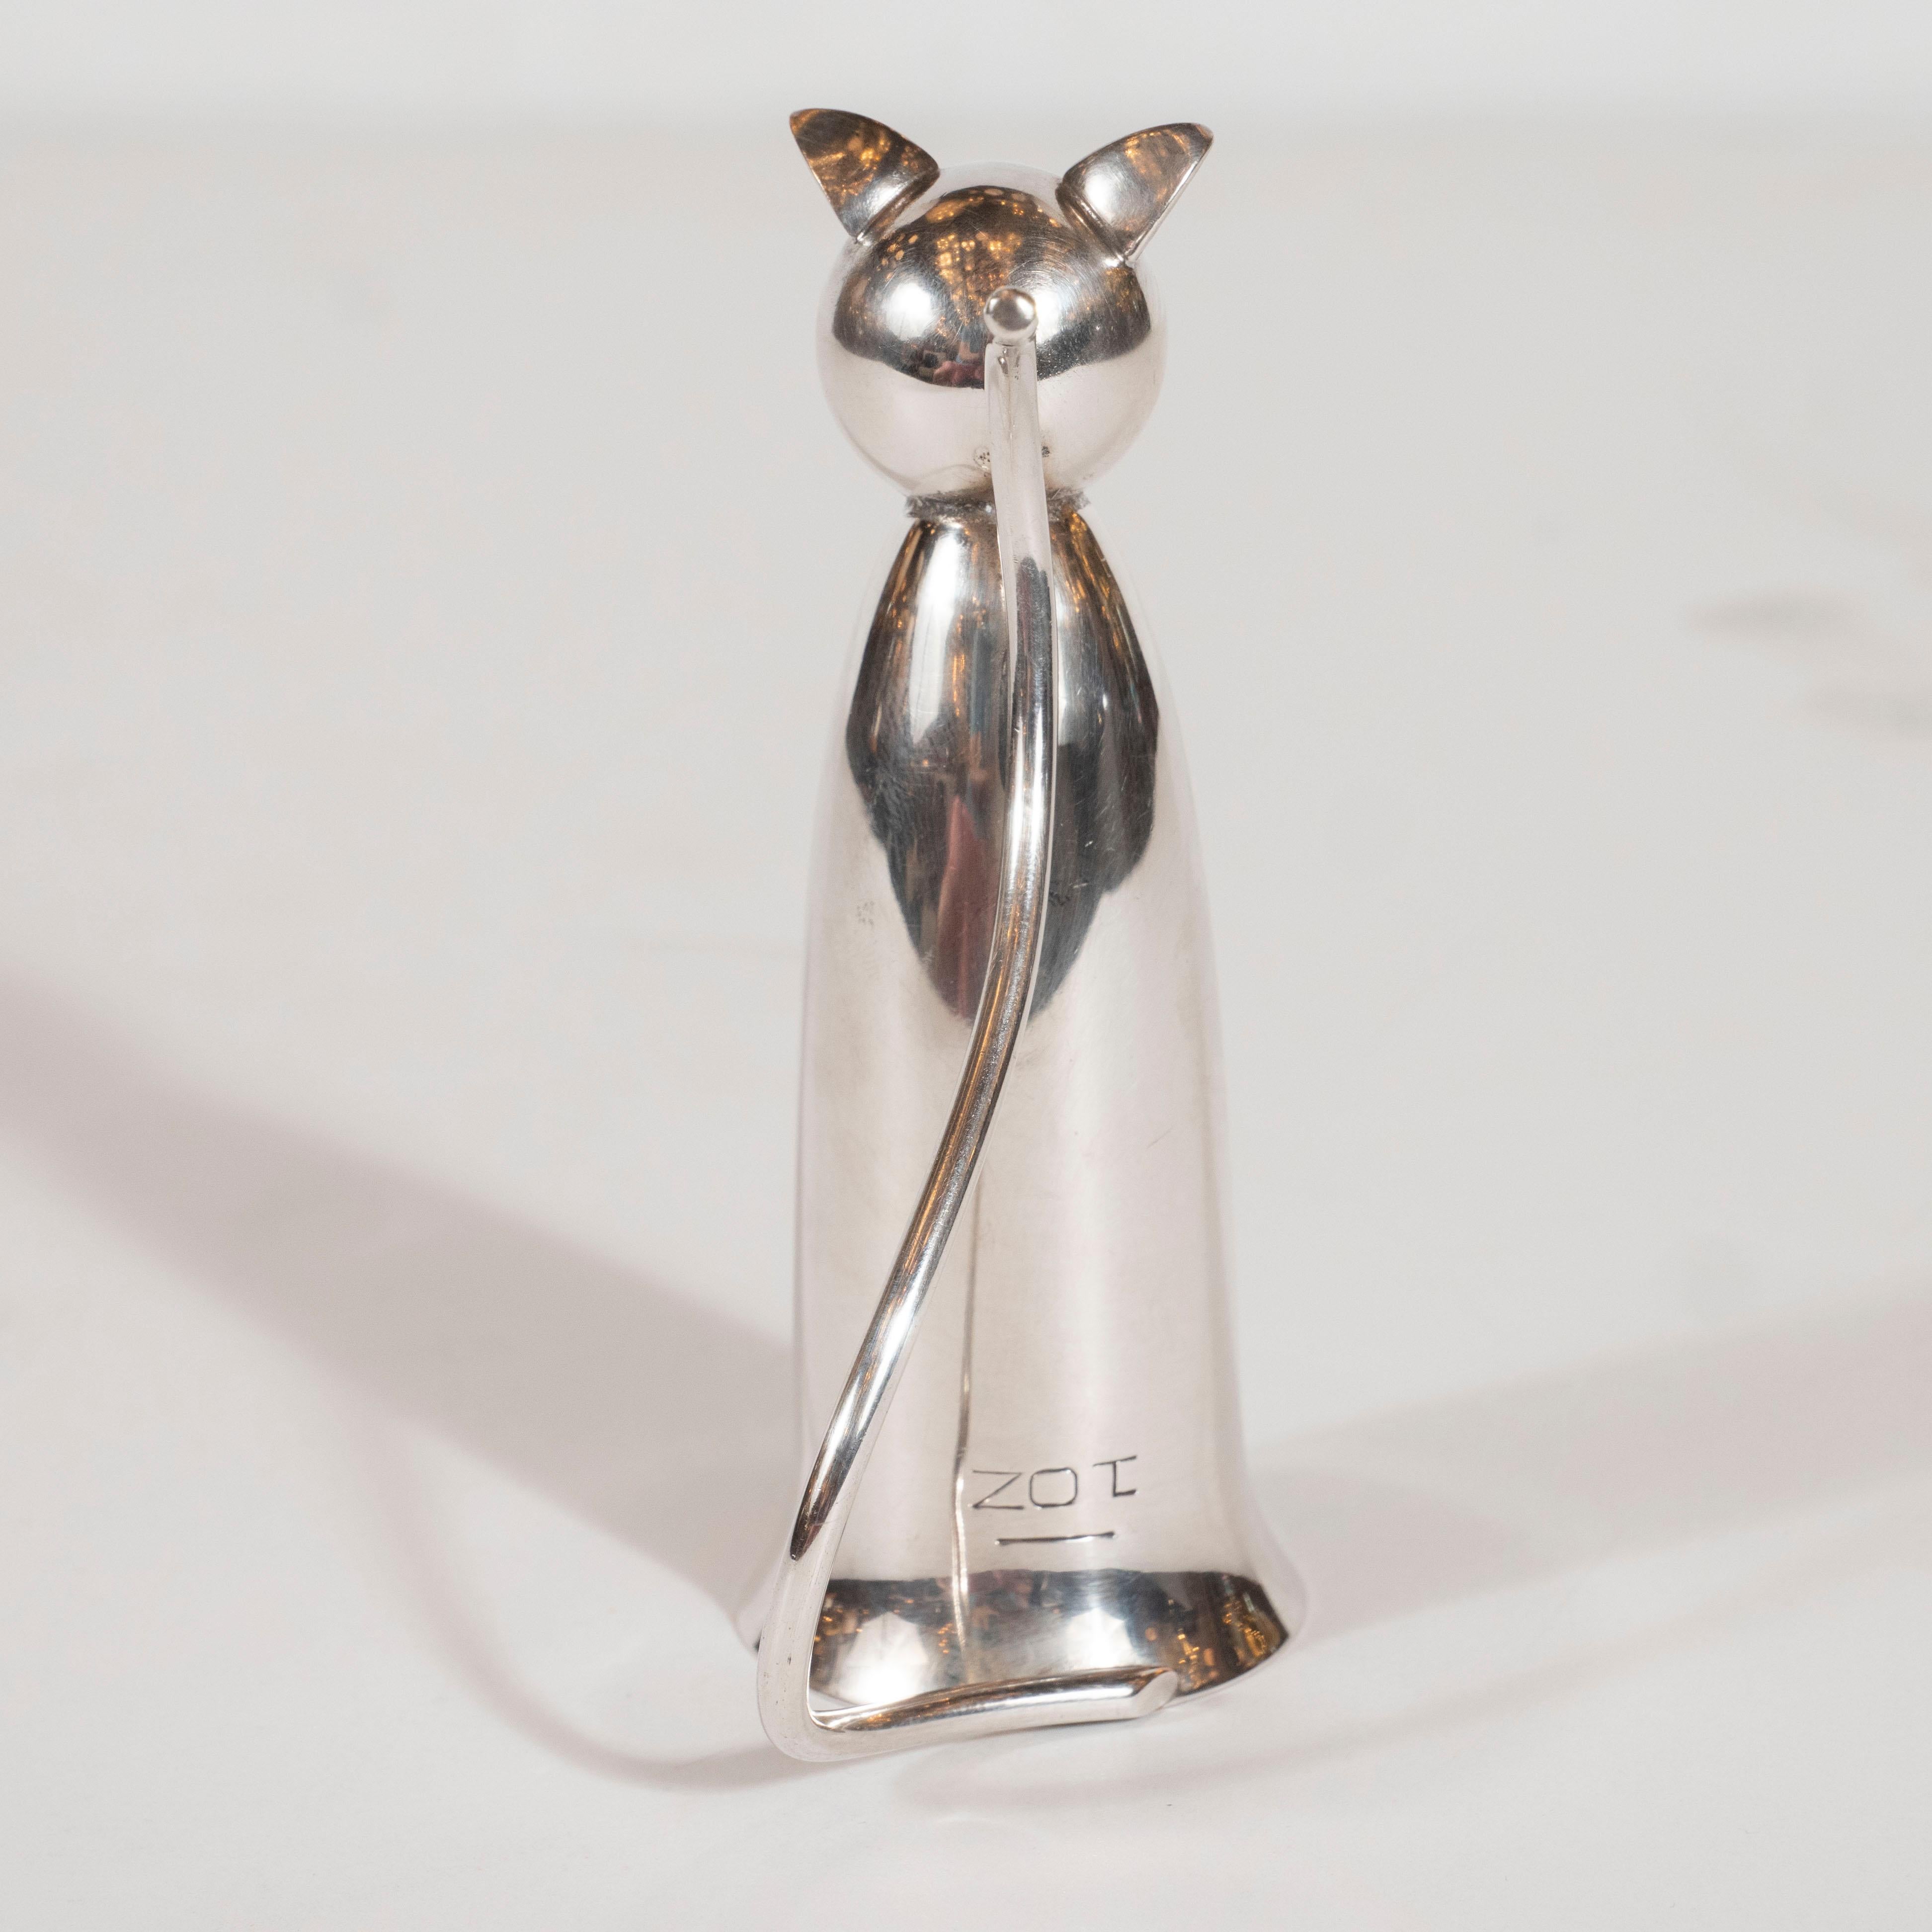 Art Deco American Sculptural Silver Plated Stylized Cat Jigger by Napier 1